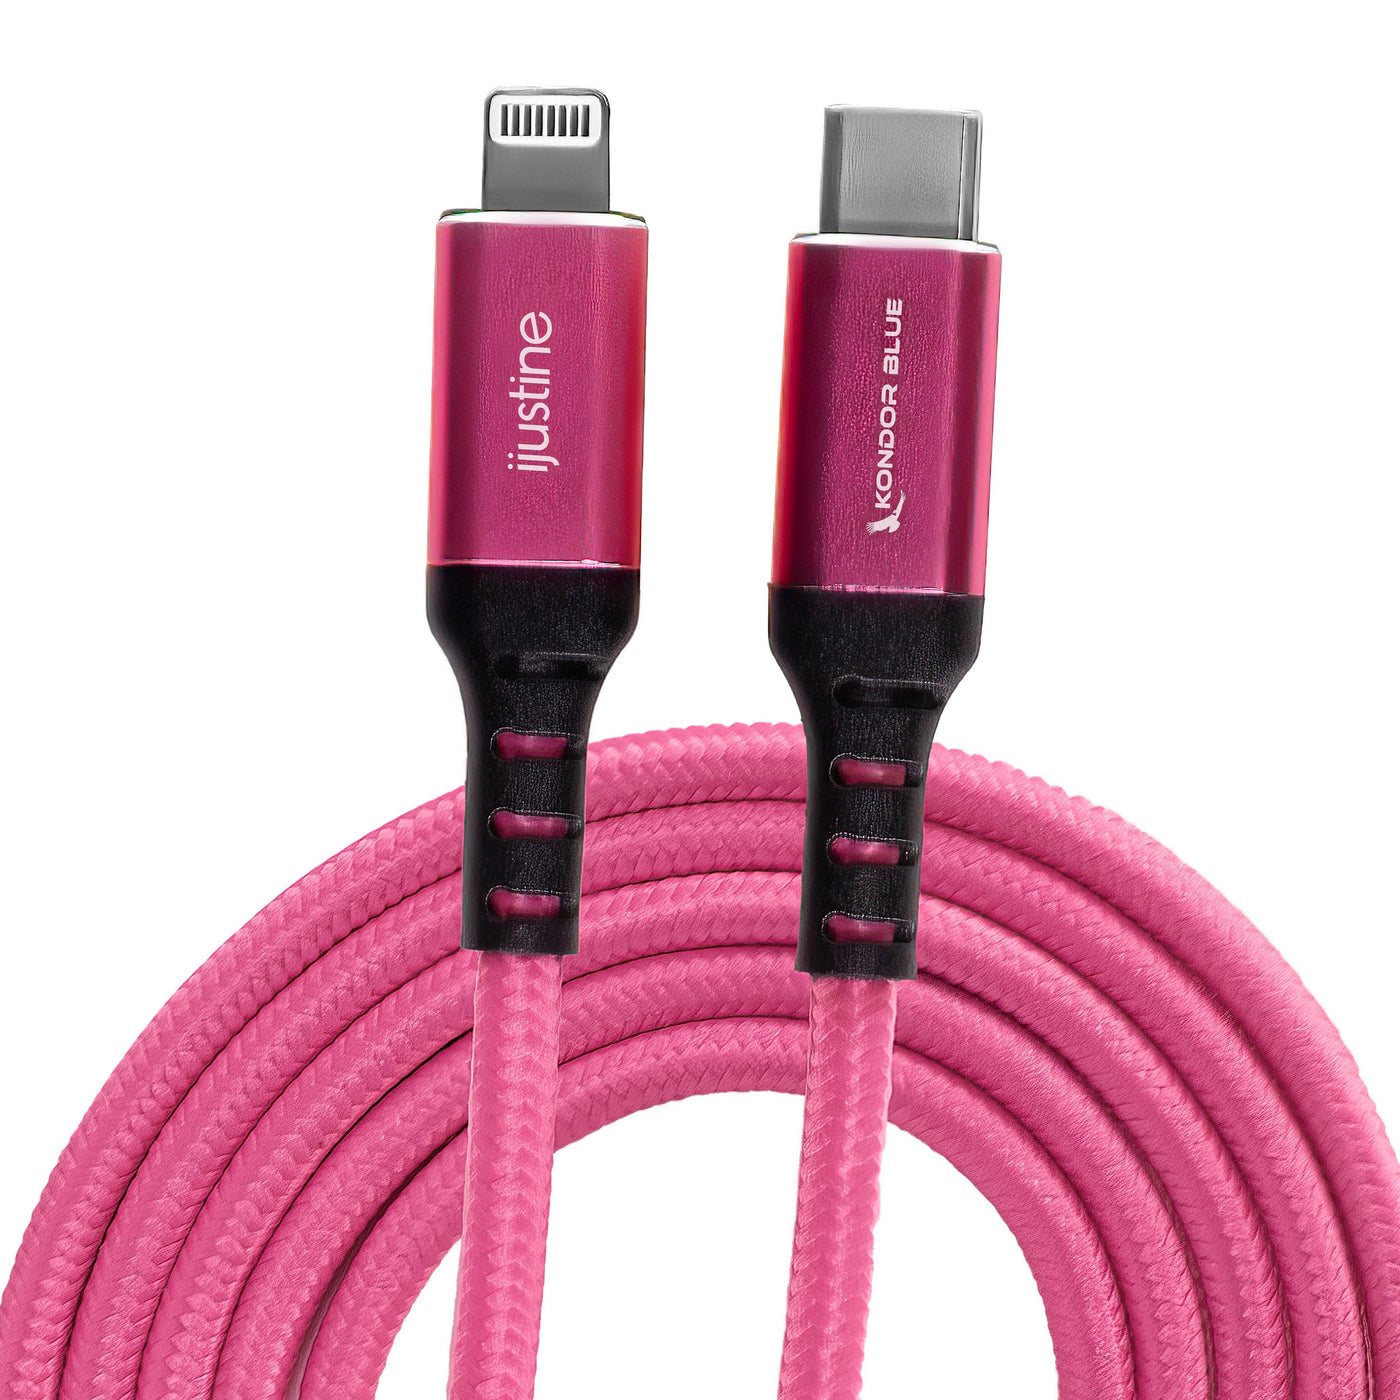 iJustine Pink Lightning Cable for iPhone Charging & Sync USB-C & USB-A (1 Meter/3.3FT)